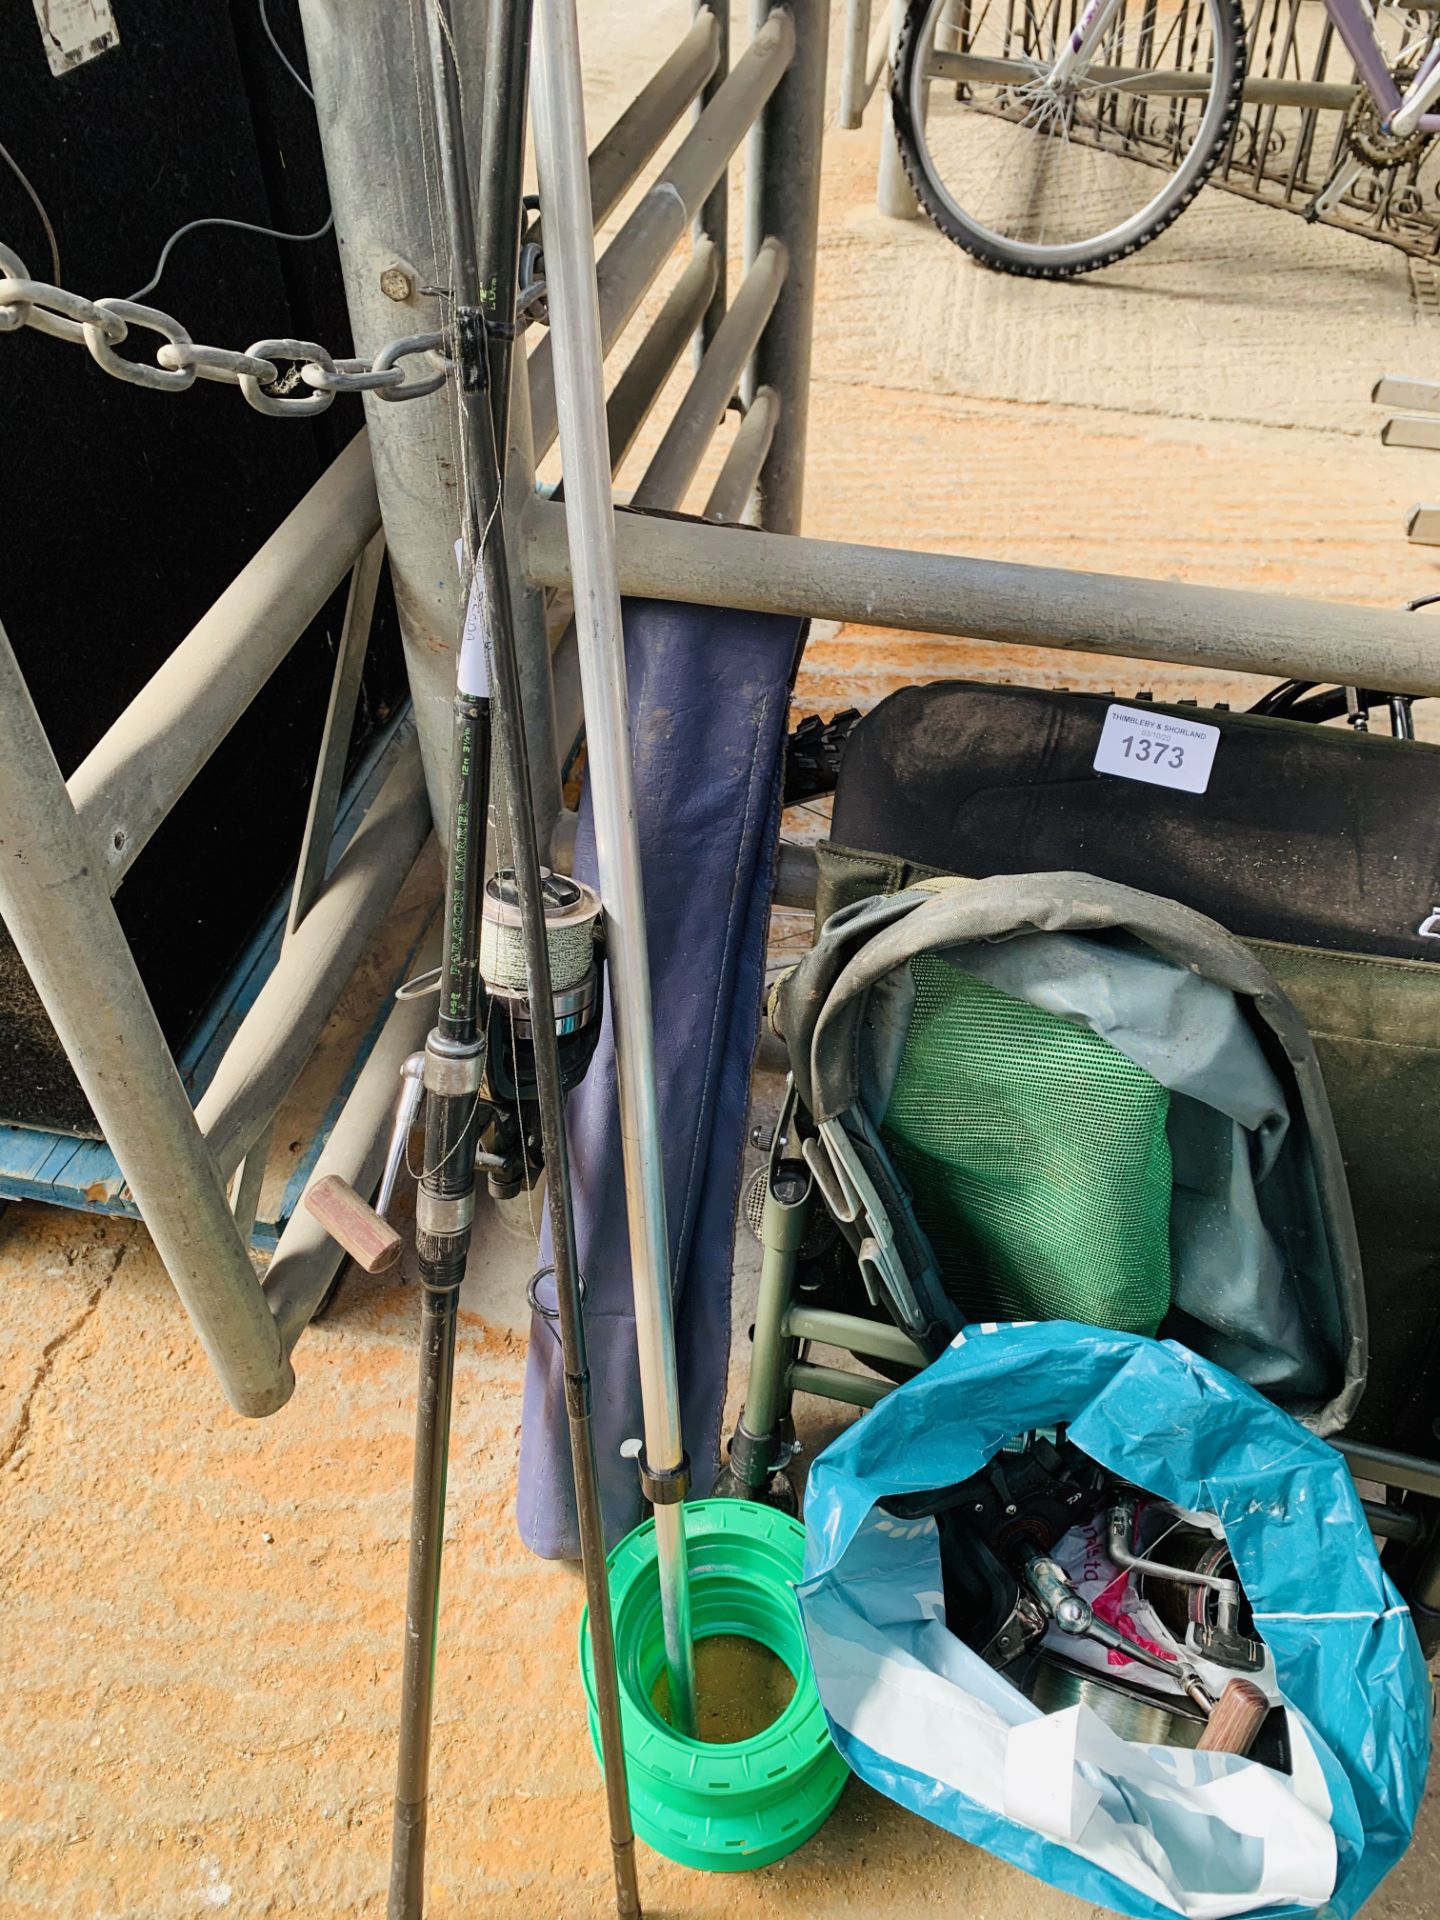 Fishing equipment, including nets, seat, reels, rods. This item carries VAT. - Image 2 of 4